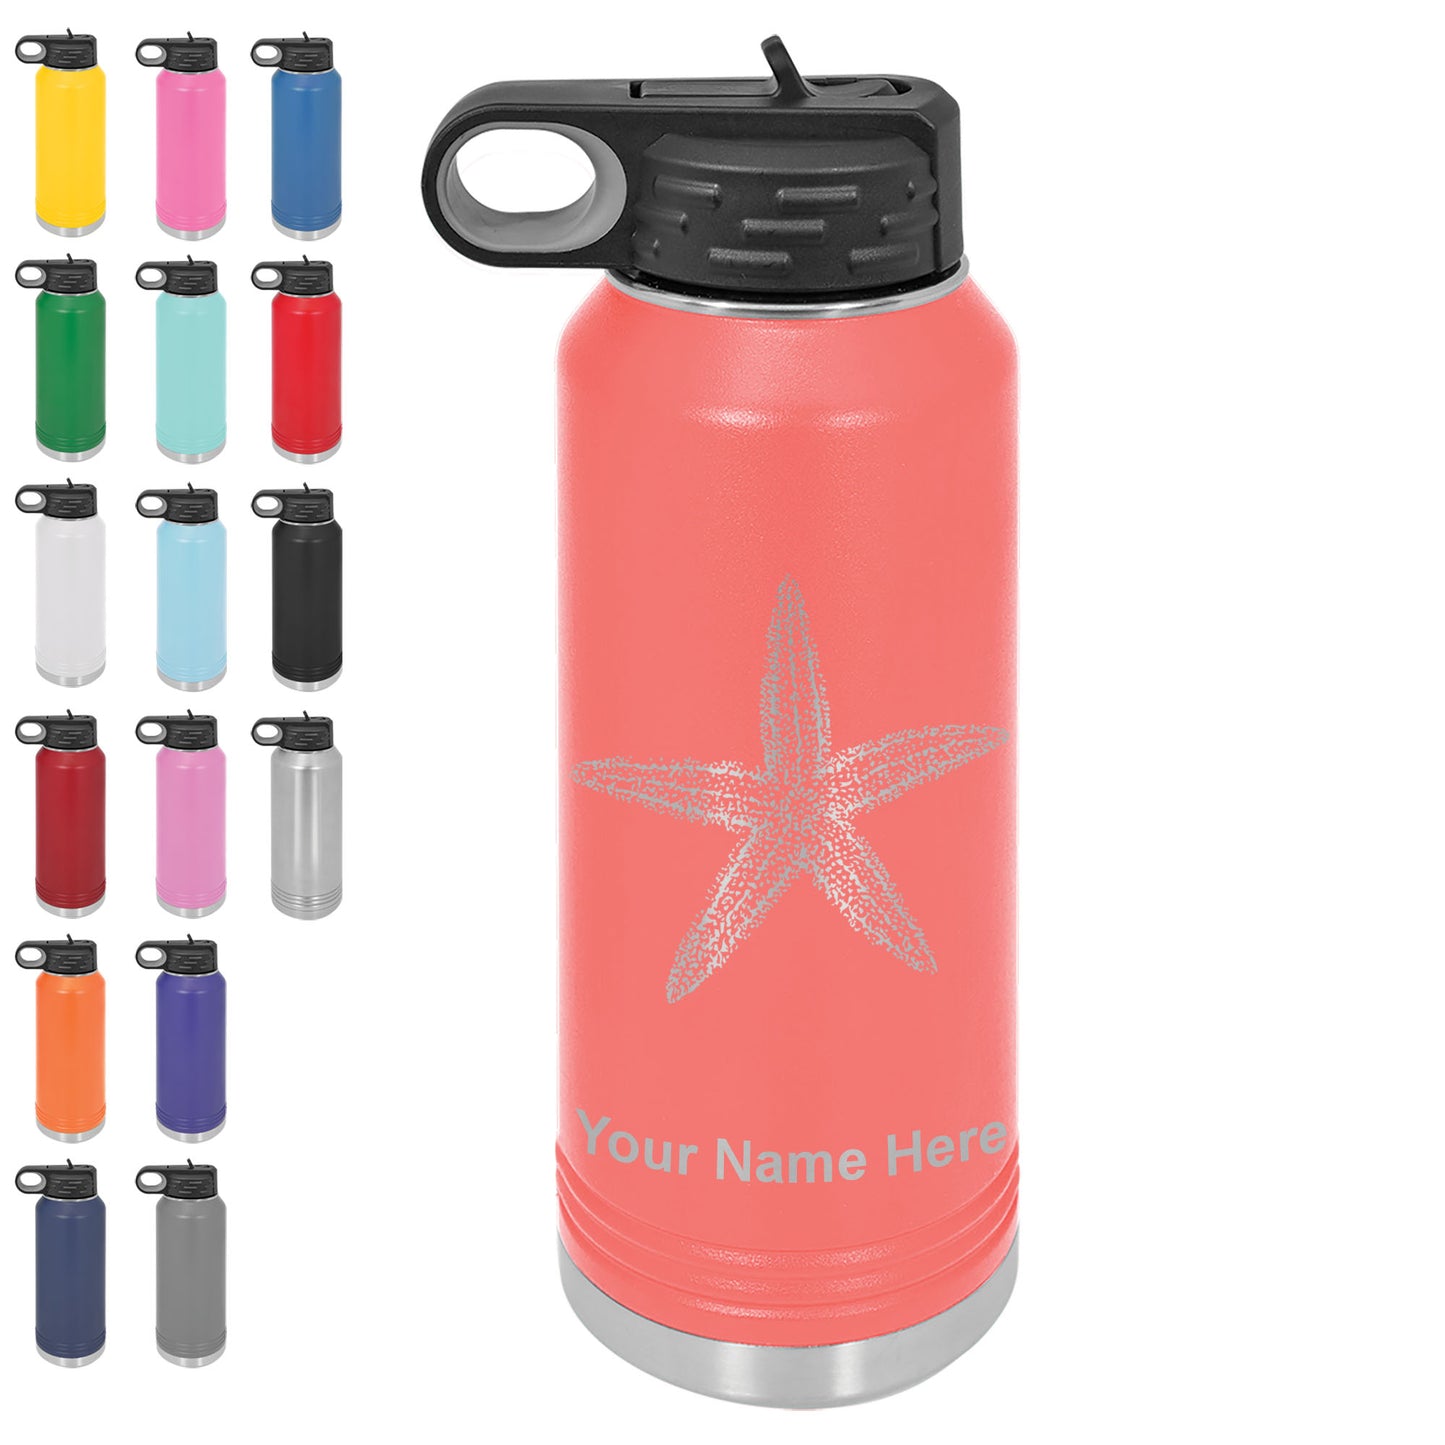 LaserGram 32oz Double Wall Flip Top Water Bottle with Straw, Starfish, Personalized Engraving Included